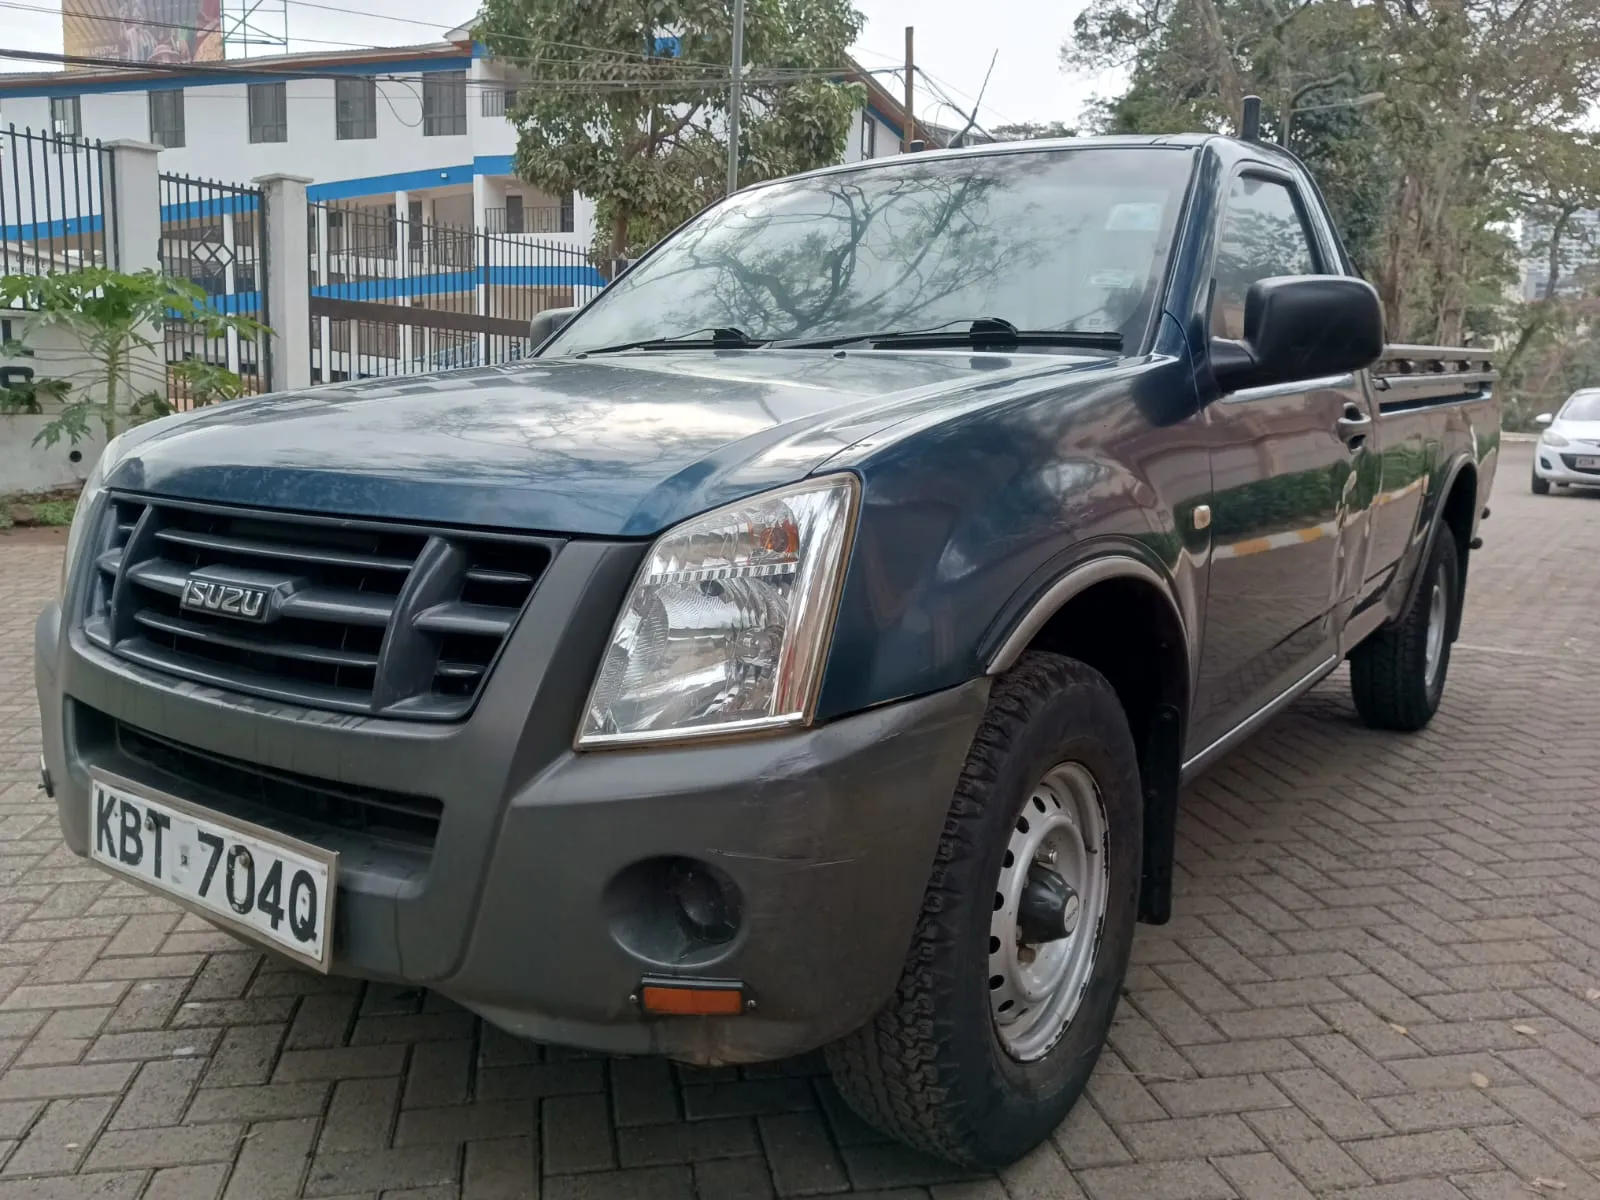 Cars Cars For Sale/Vehicles-Isuzu D-max 2012 Local Assembly Pay 30% Deposit Trade in Ok Exclusive 6